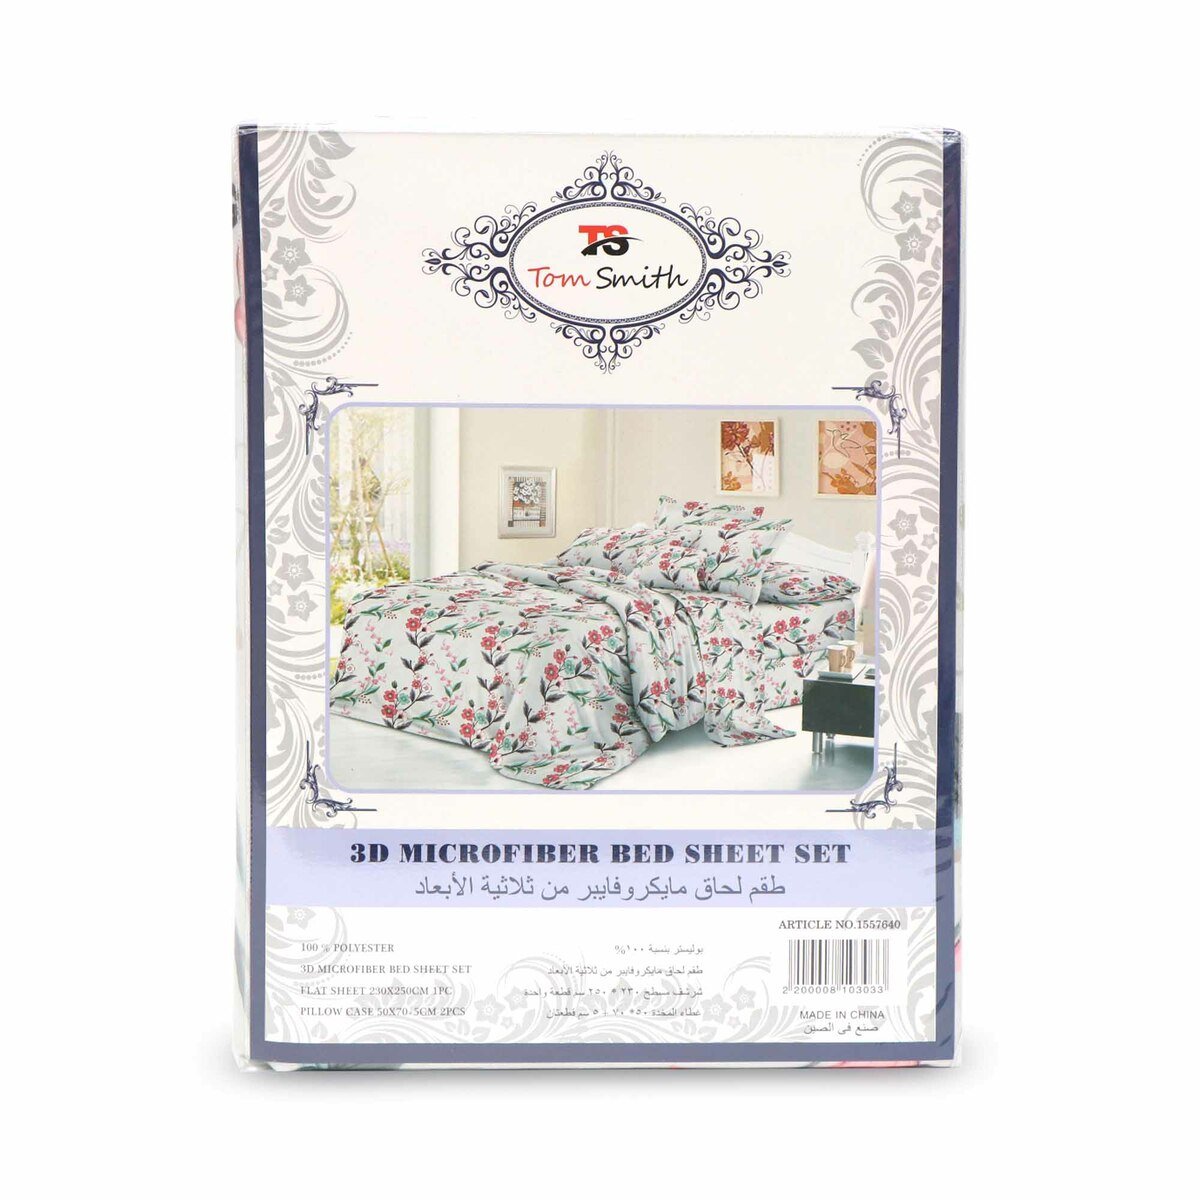 Tom Smith Bed Sheet Size: 230x250cm 1pc + Pillow Cover Size: 50x70cm Grey & Leaf